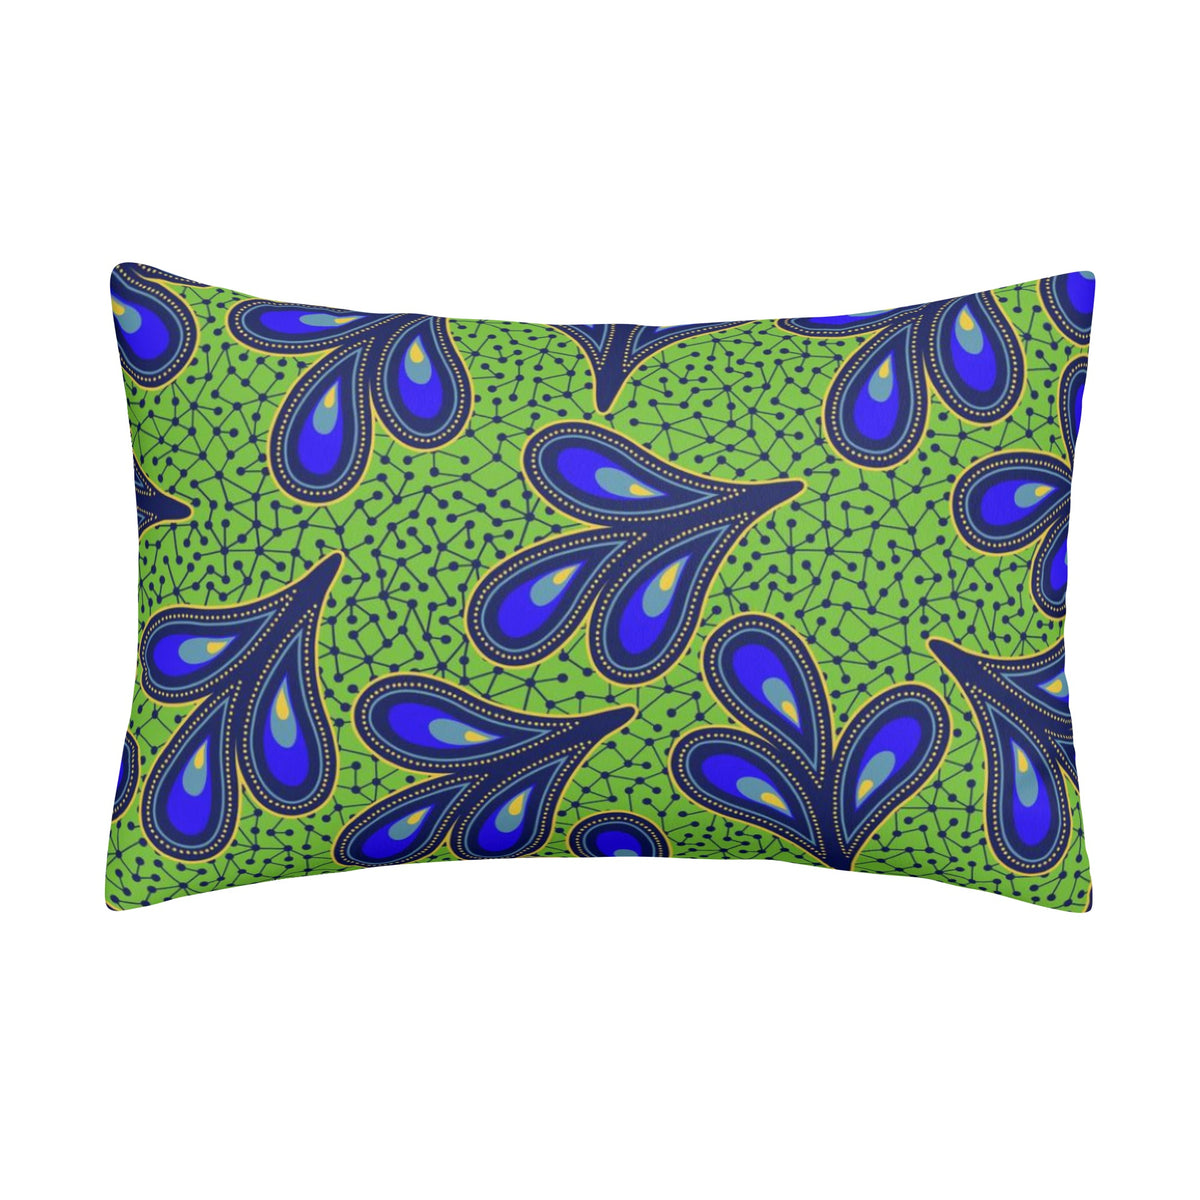 Double Side Printing Rectangular Pillow Cover Pop